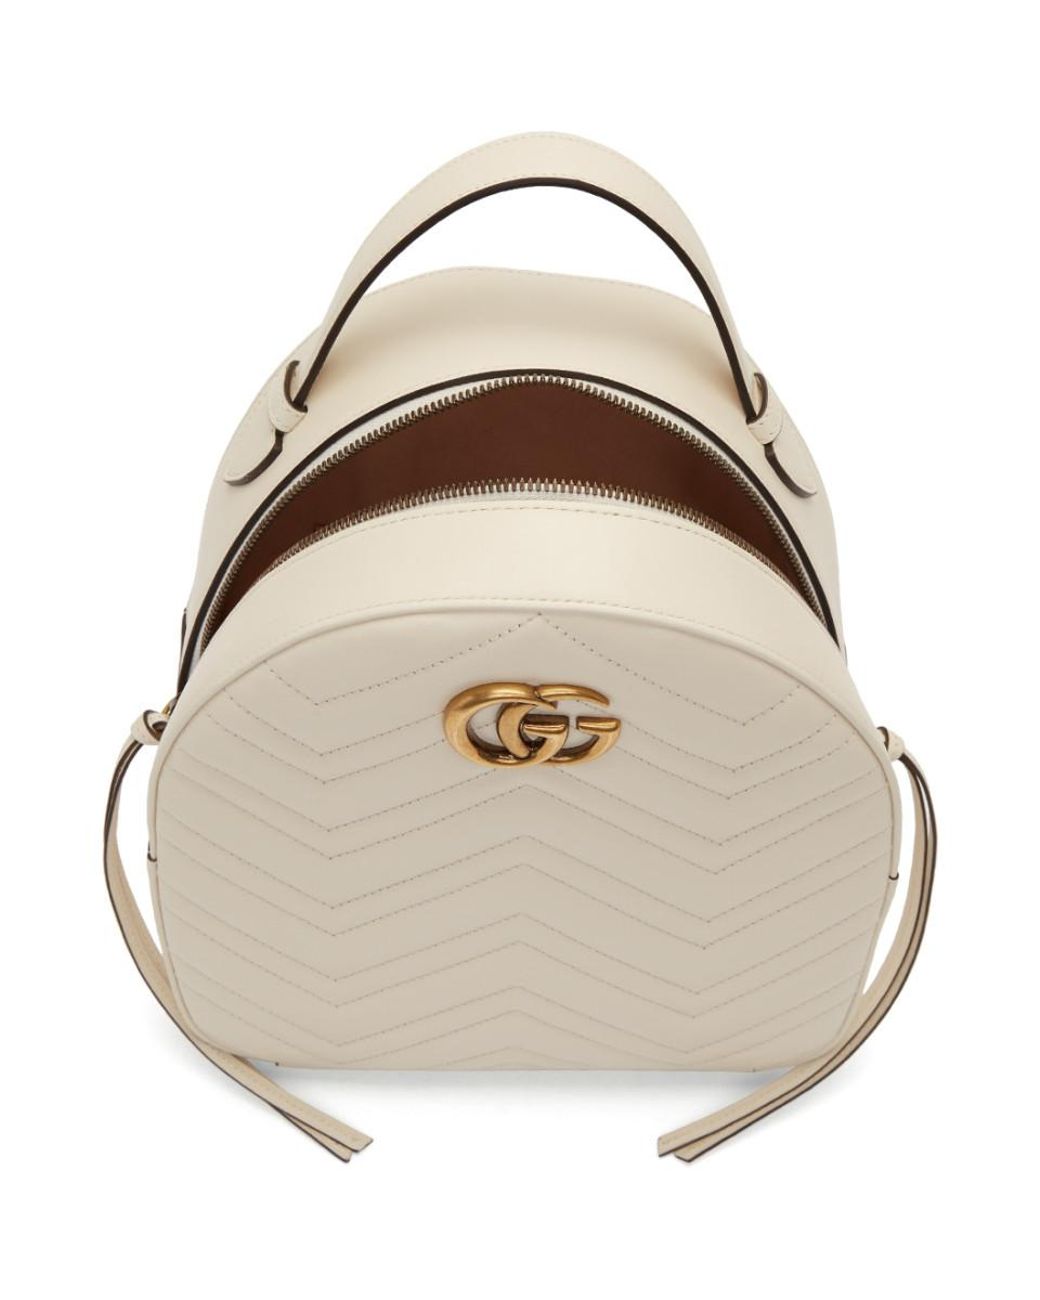 Gucci marmont White Mystic Backpack GG Lion Leather Italy Bag